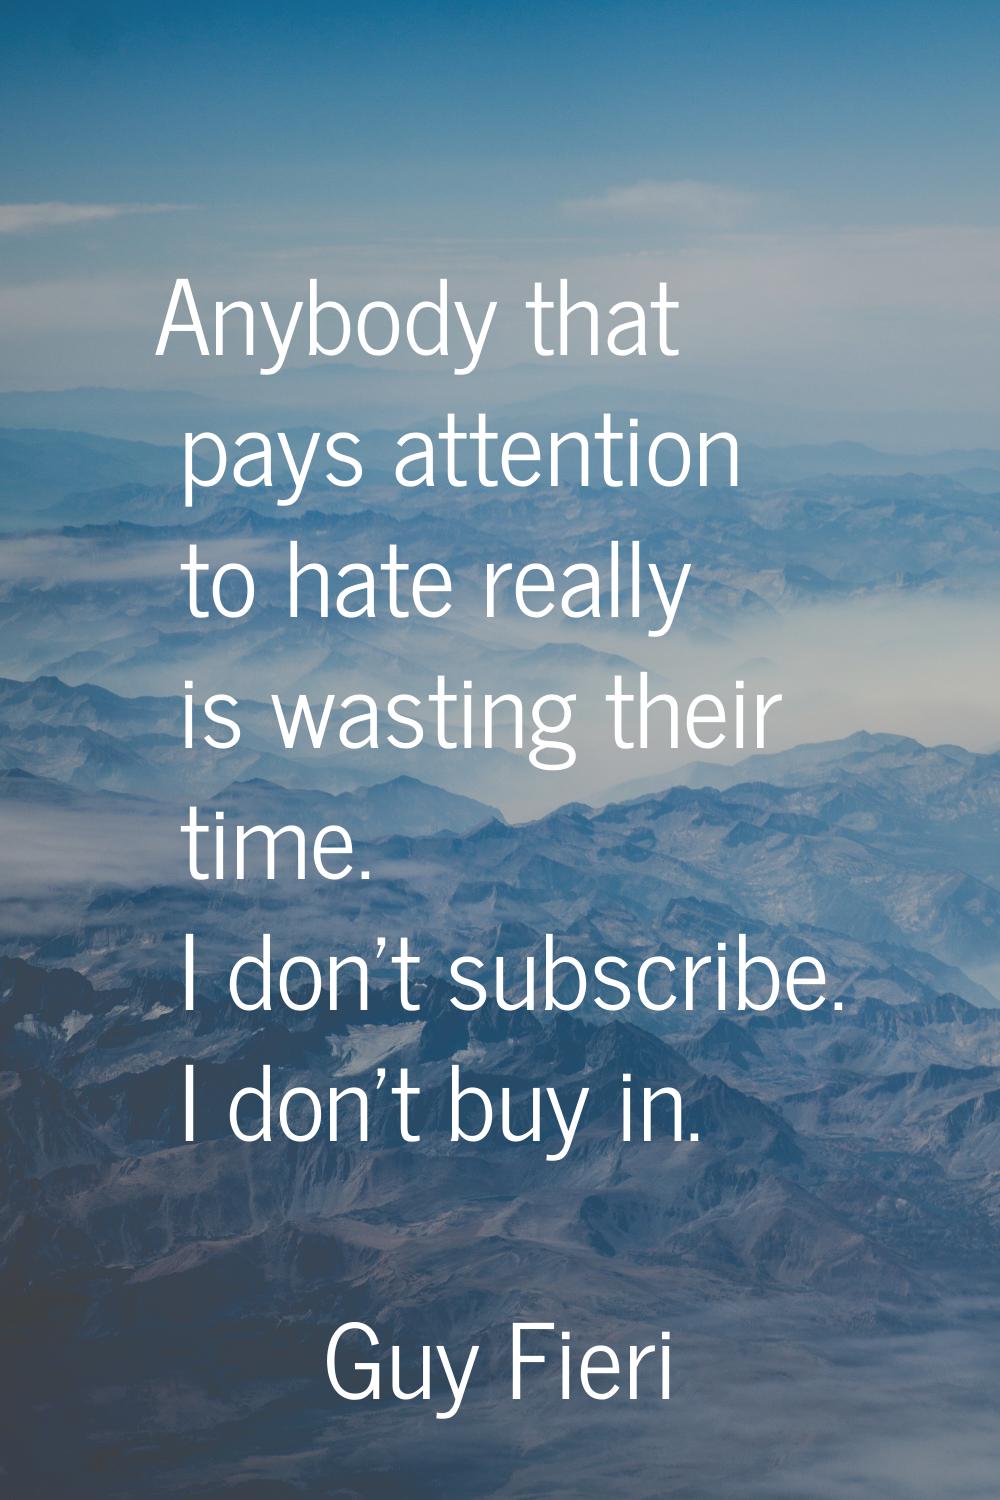 Anybody that pays attention to hate really is wasting their time. I don't subscribe. I don't buy in